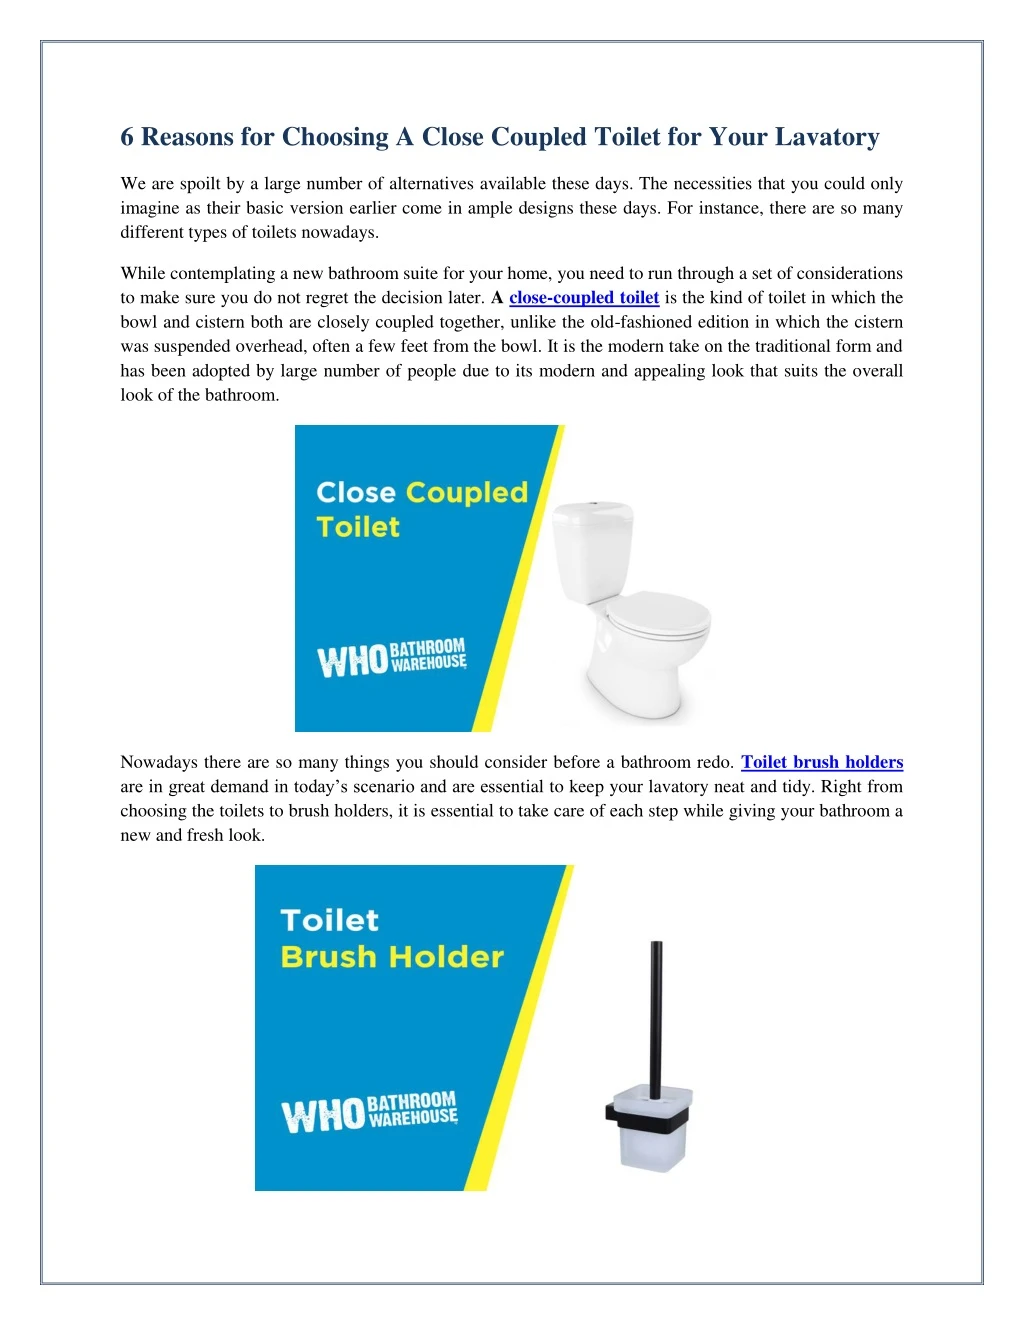 6 reasons for choosing a close coupled toilet